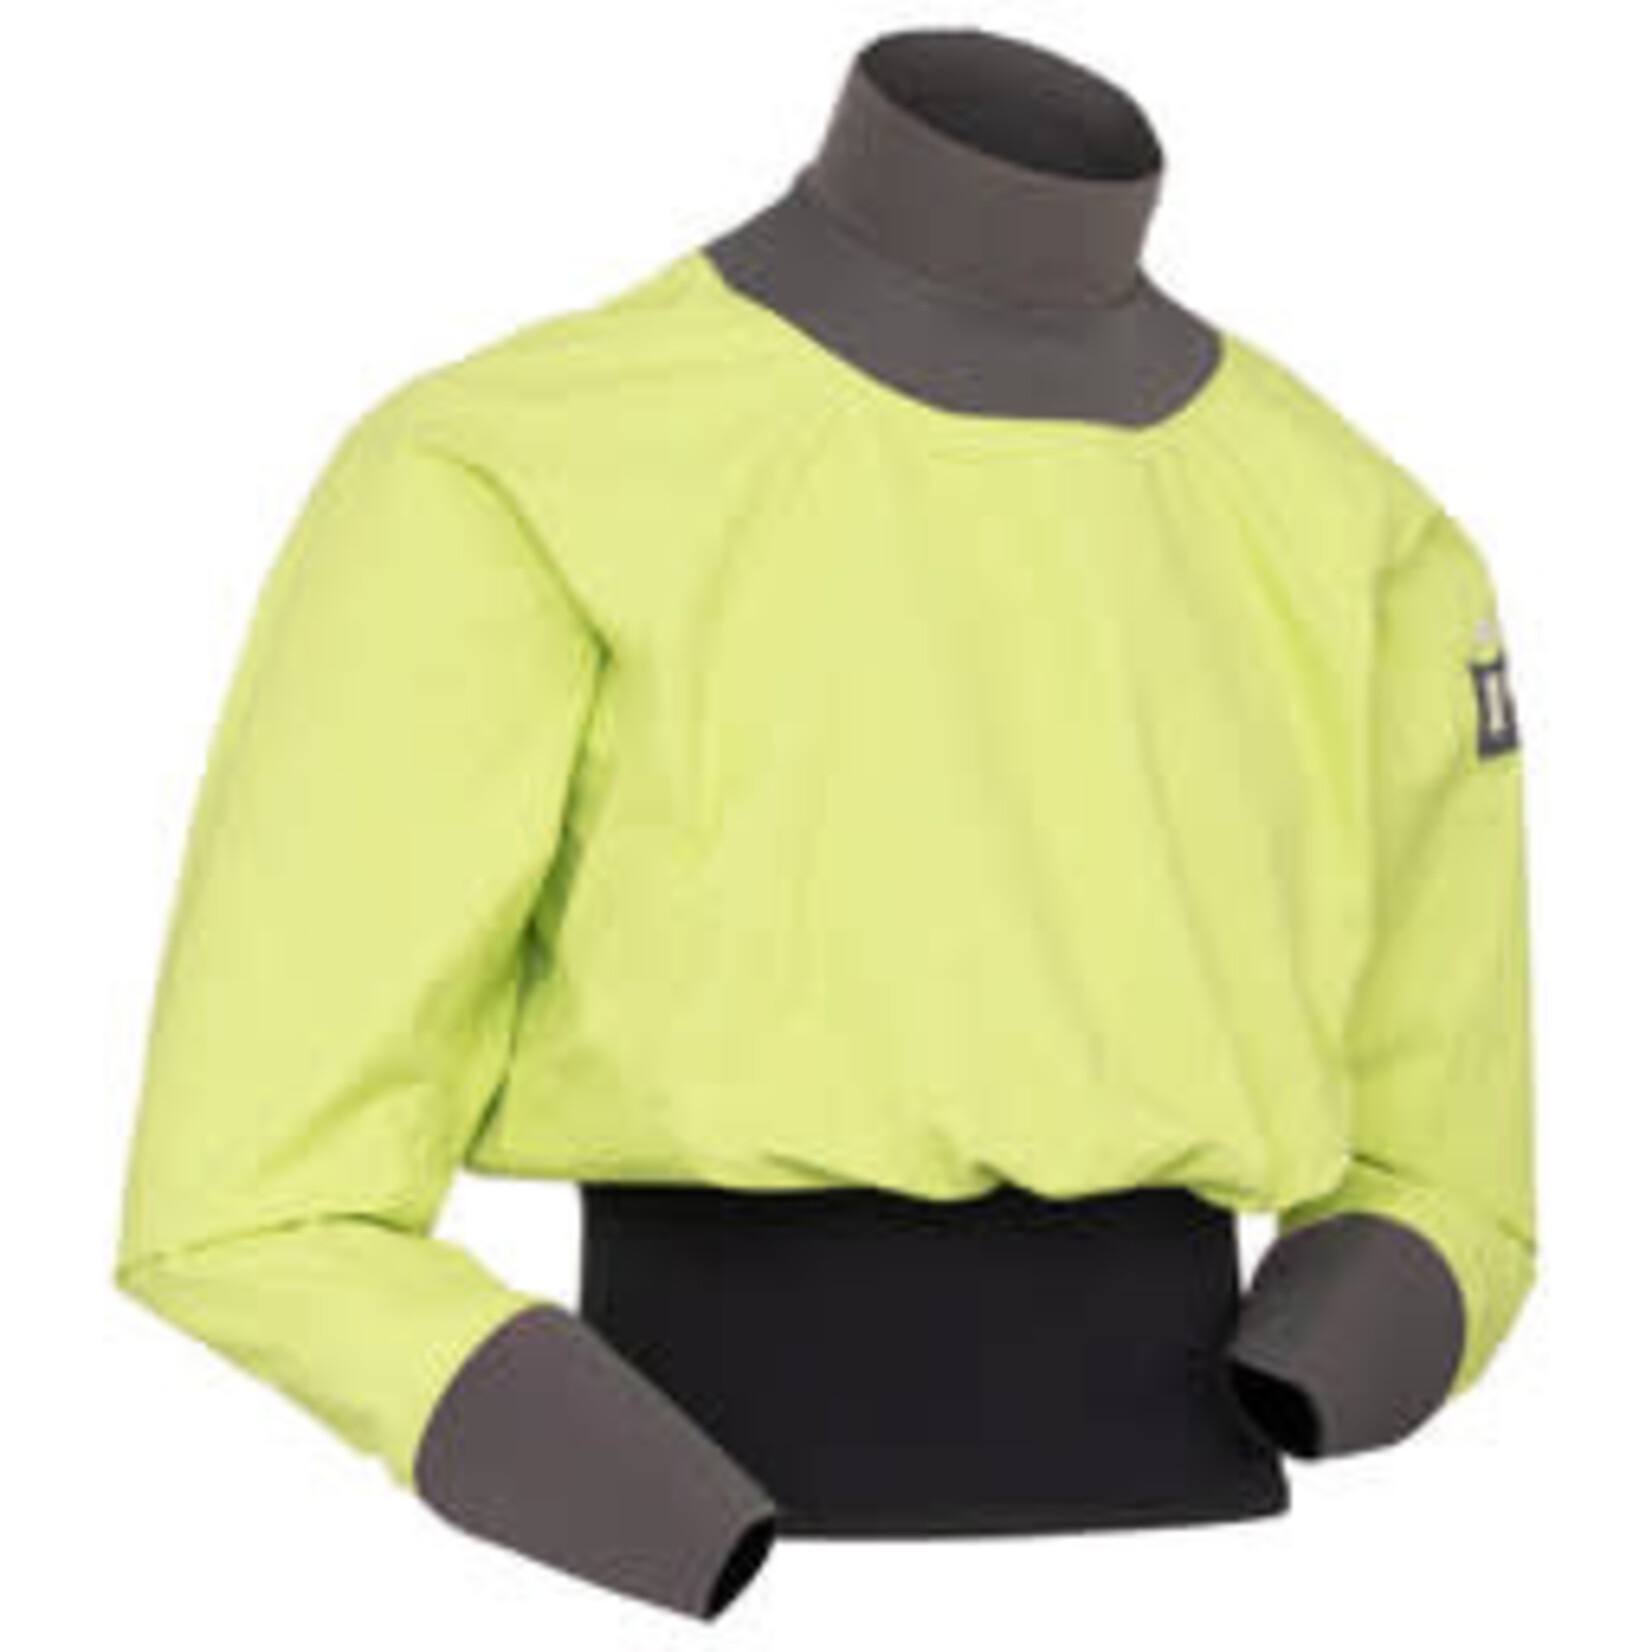 Immersion Research Immersion Research Long Sleeve Nano Jacket